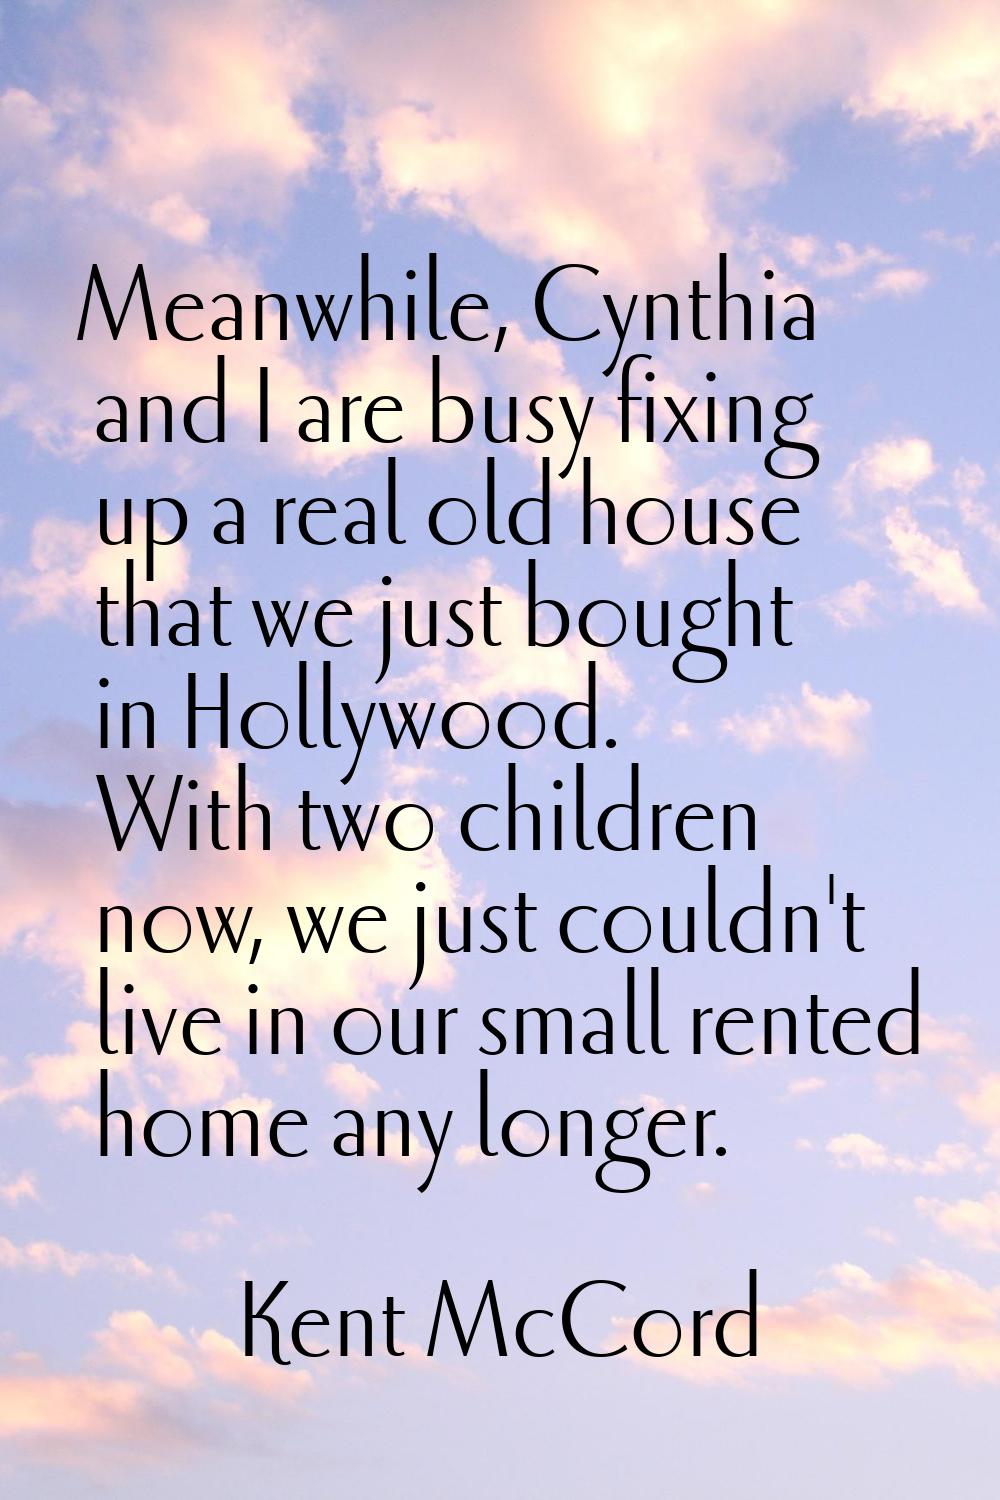 Meanwhile, Cynthia and I are busy fixing up a real old house that we just bought in Hollywood. With